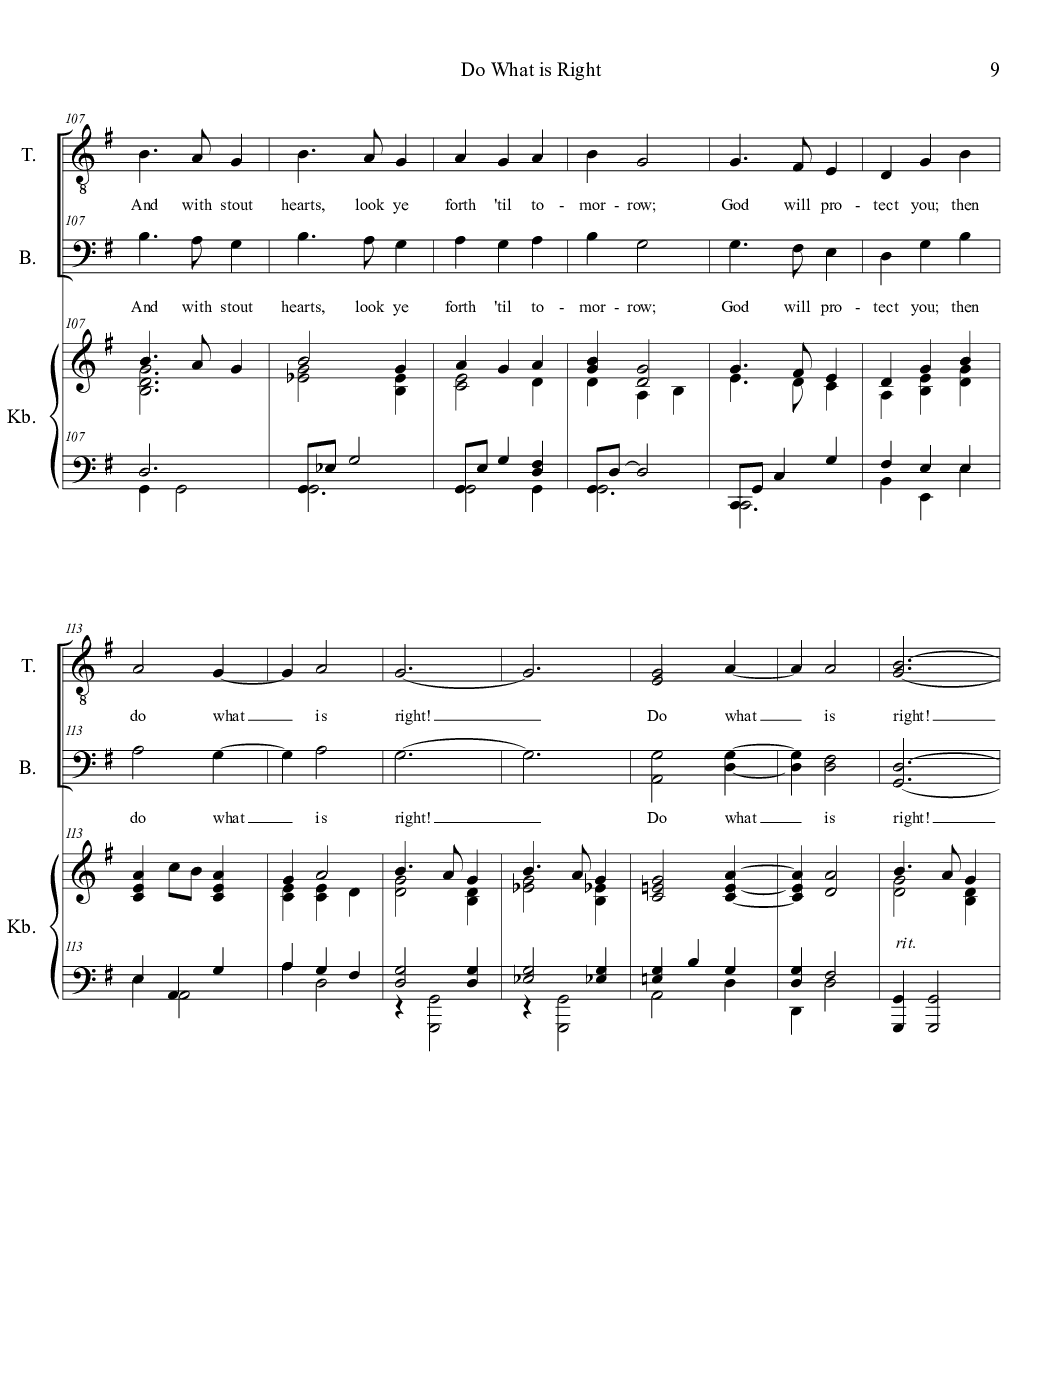 Sheet_music_picture